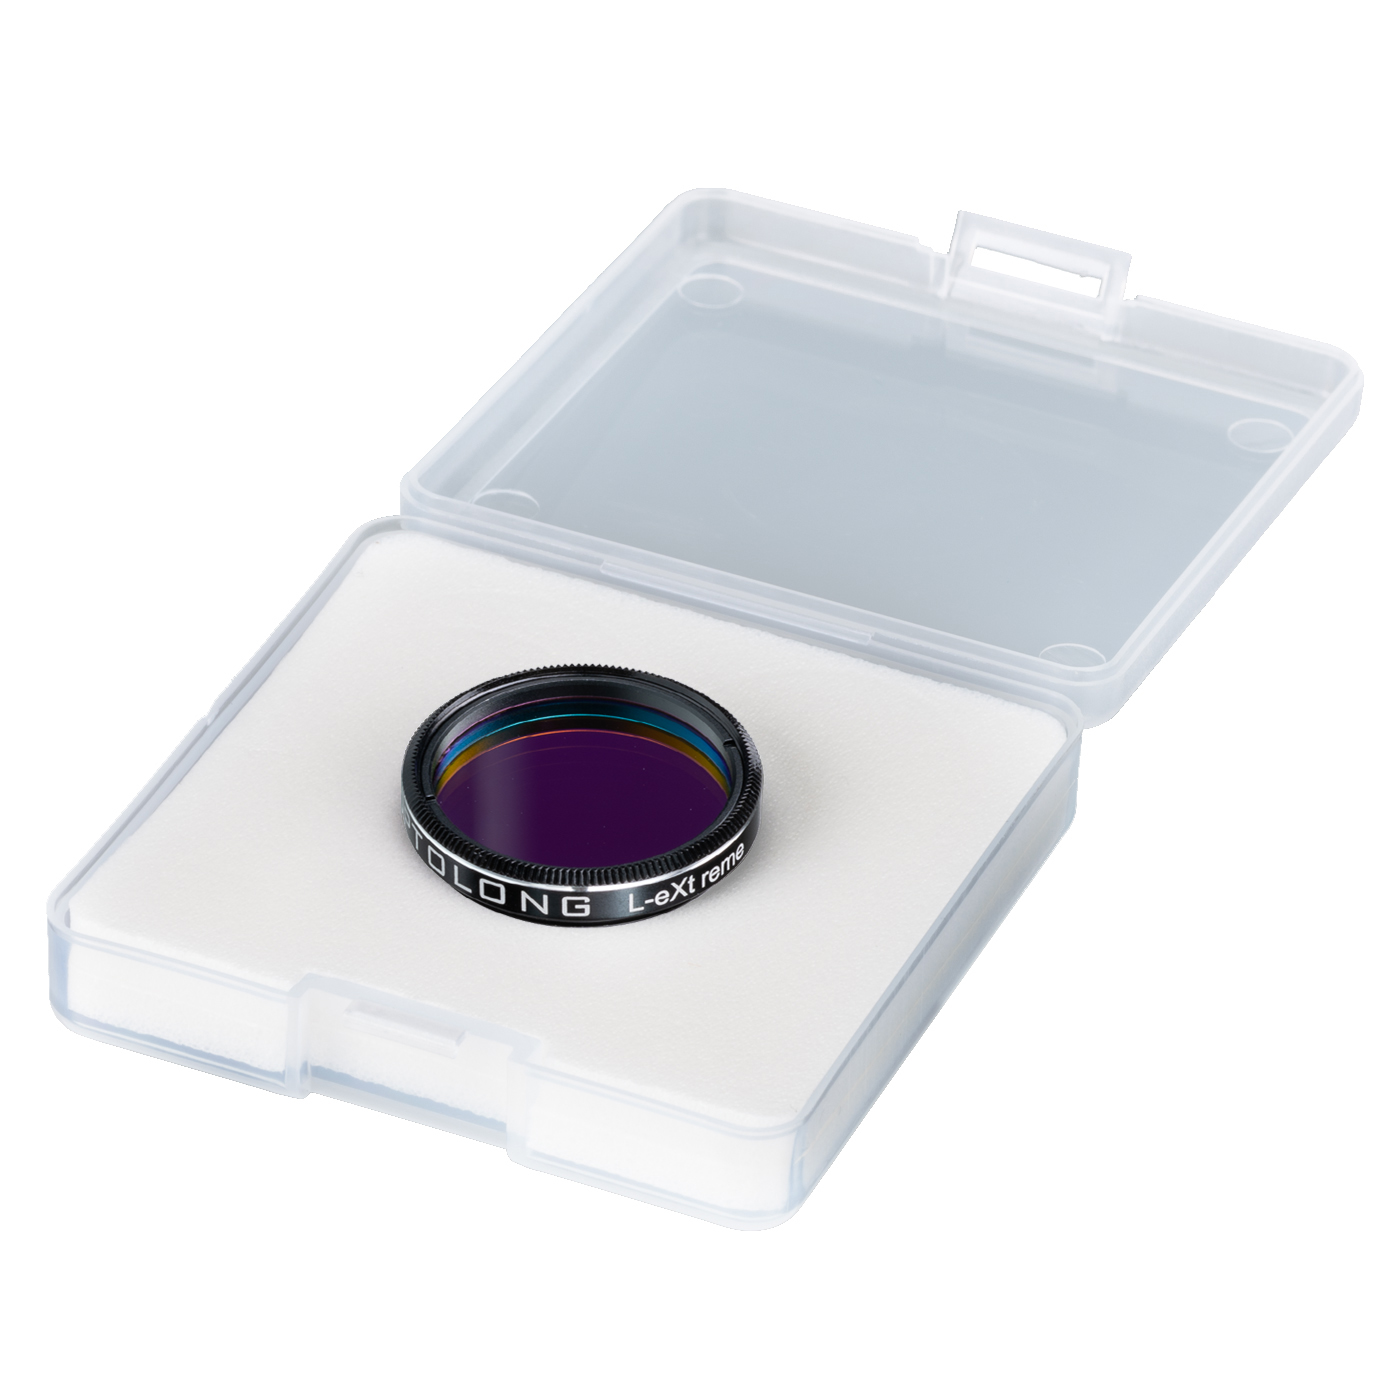 EXPLORE SCIENTIFIC OPTOLONG 1,25'' L-eXtreme Deep-Sky Light Pollution Filter - Refurbished